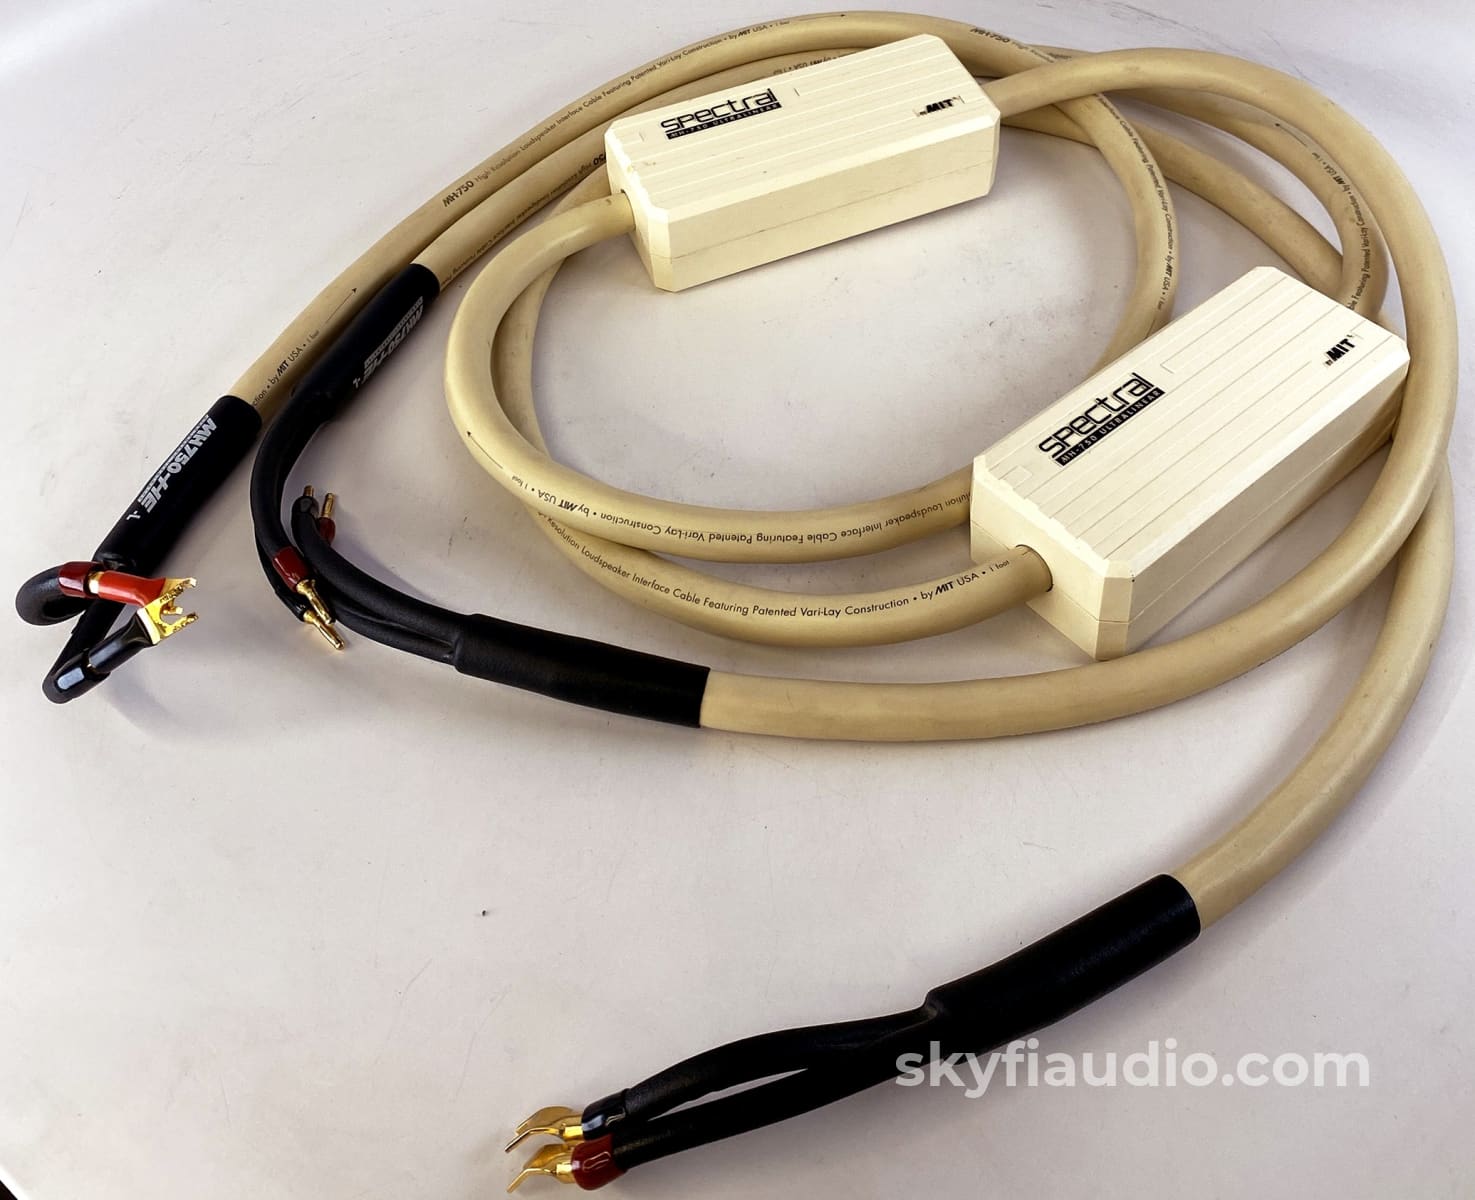 Spectral Mh-750 Ultralinear Speaker Interface Cables W/Mit Terminator Technology - 8